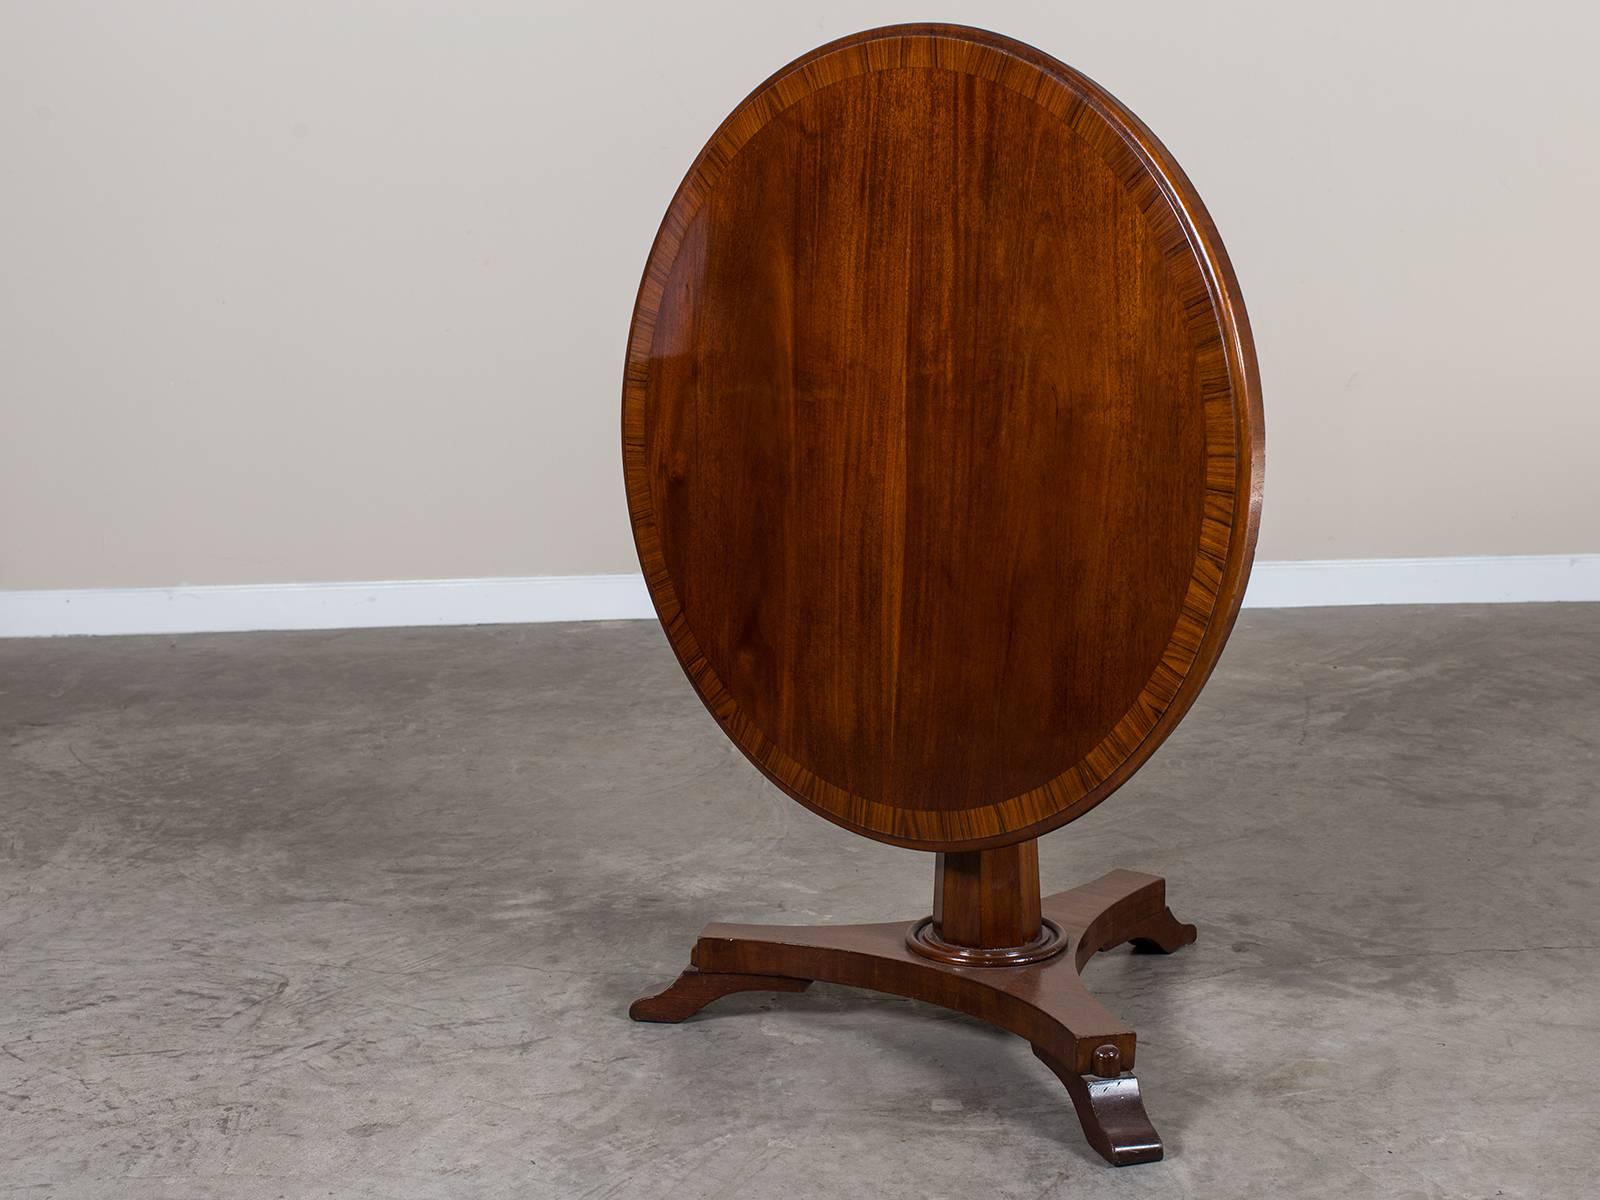 Receive our new selections direct from 1stdibs by email each week. Please click follow dealer below and see them first!

The elegant slender lines of this antique English William IV period mahogany table, circa 1840 give it a versatility for use